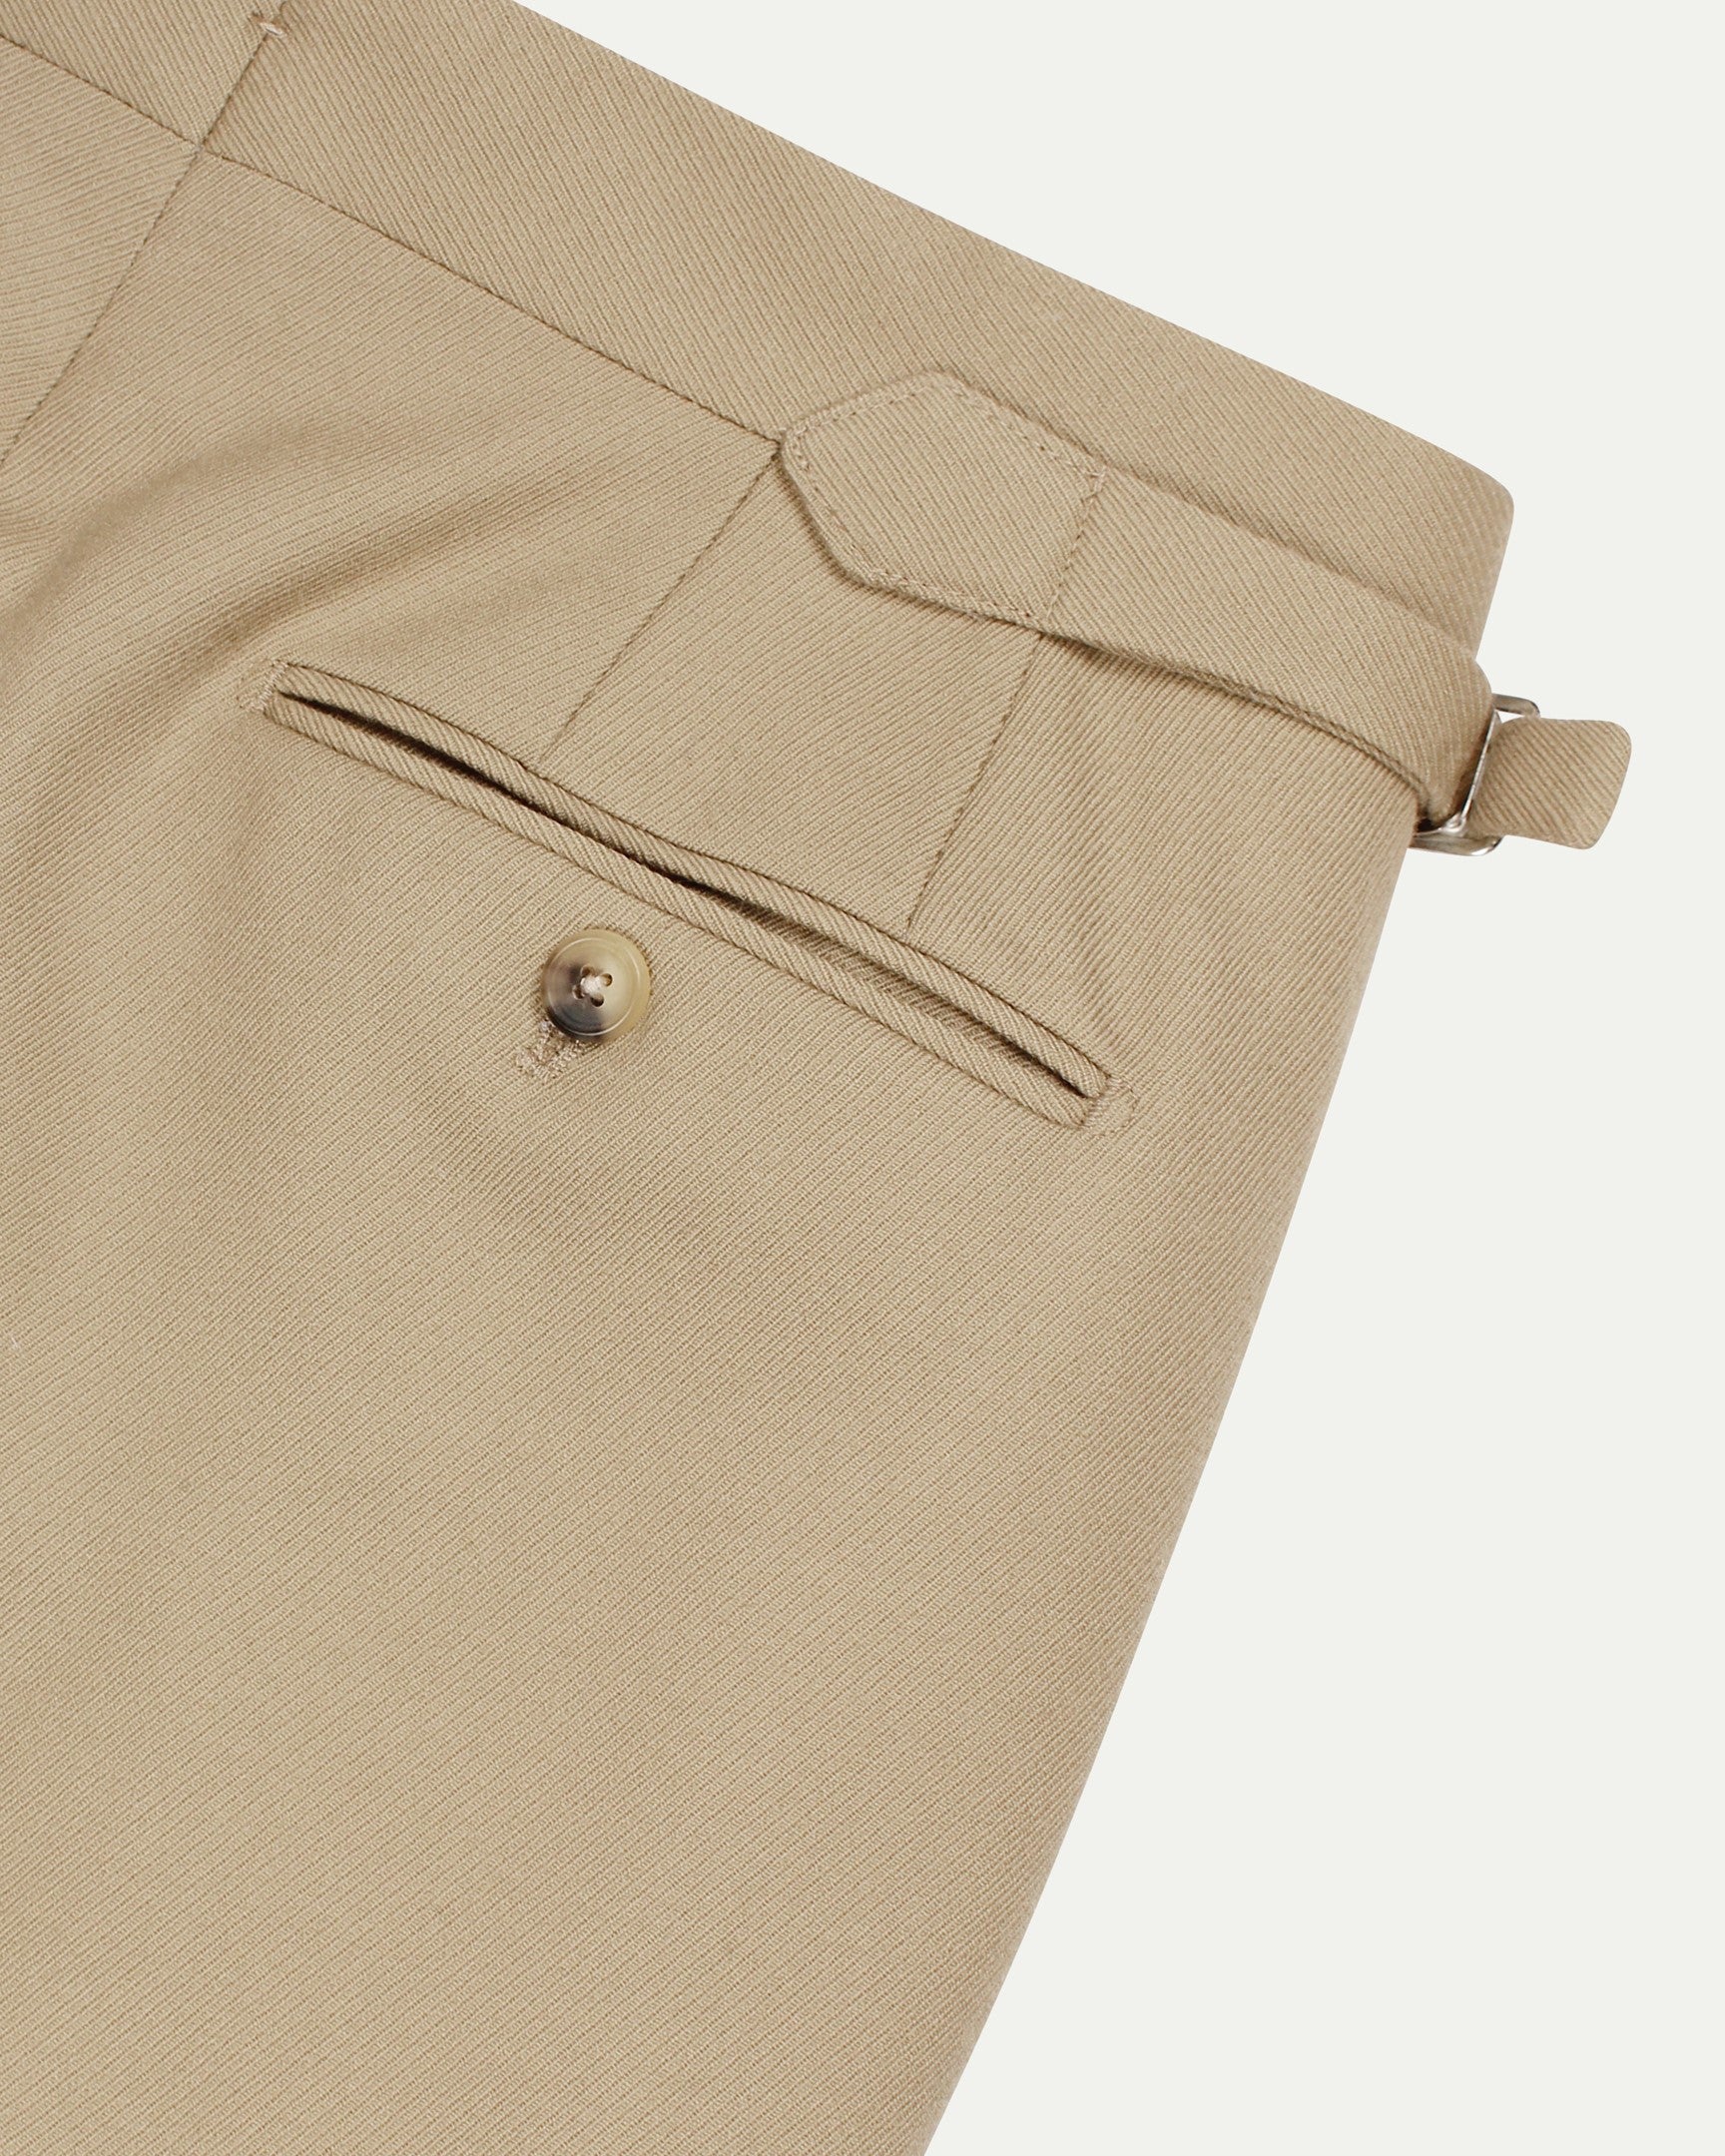 Made-To-Order Trousers in Beige Cavalry Twill